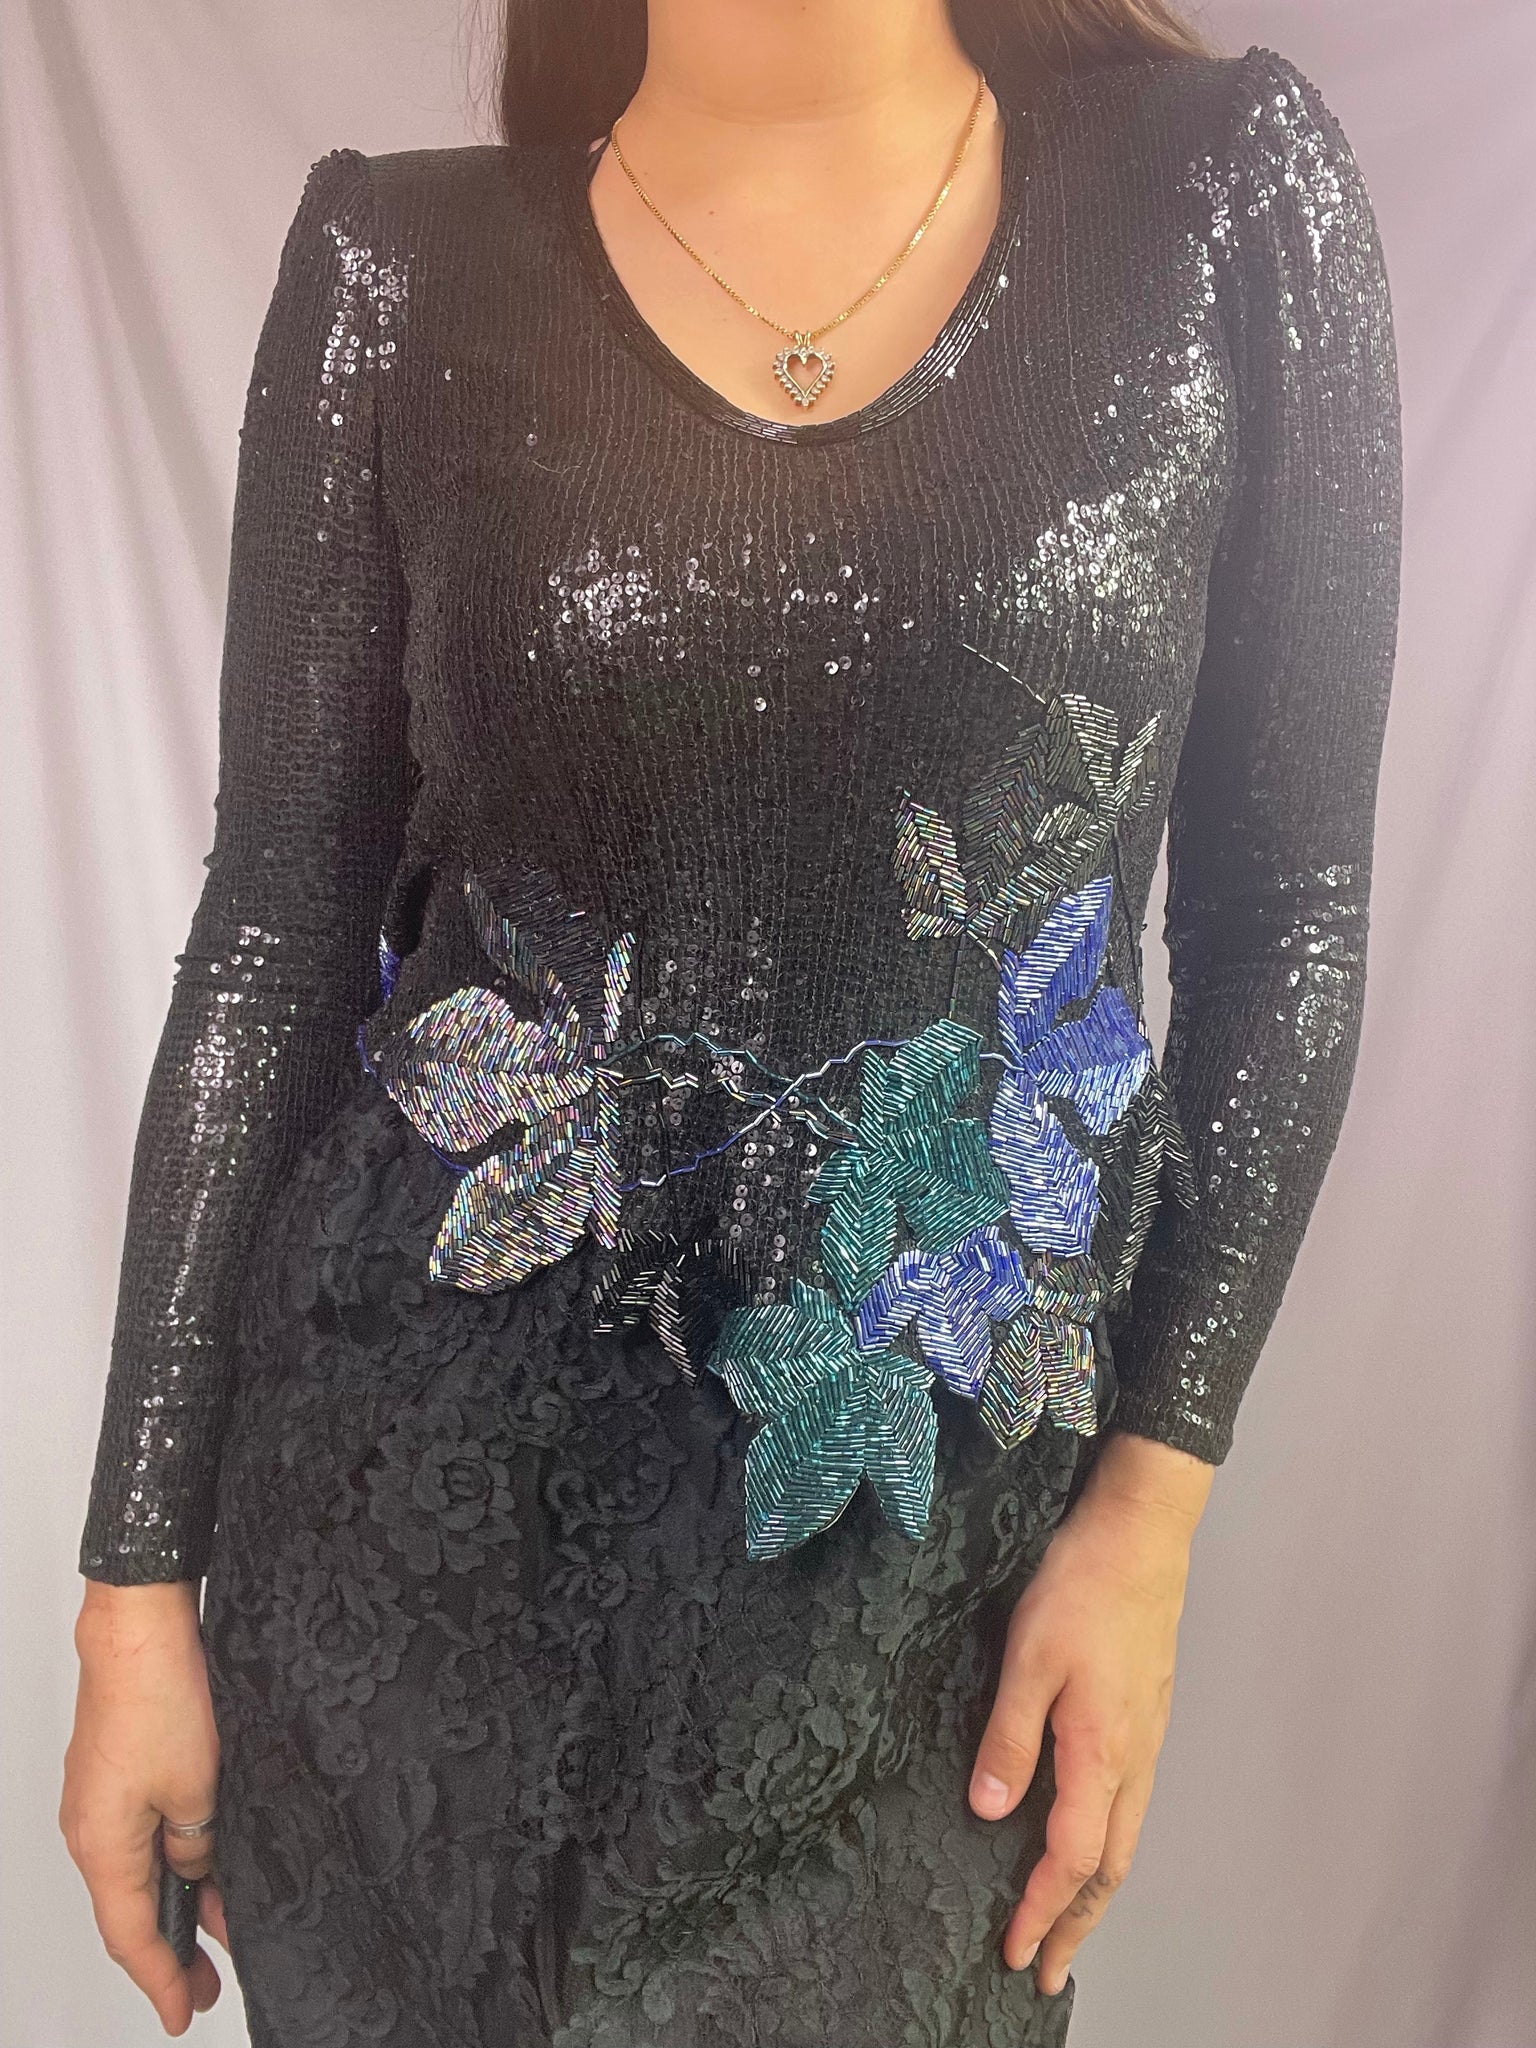 Vintage 80s homemade sequined dress, Size XS